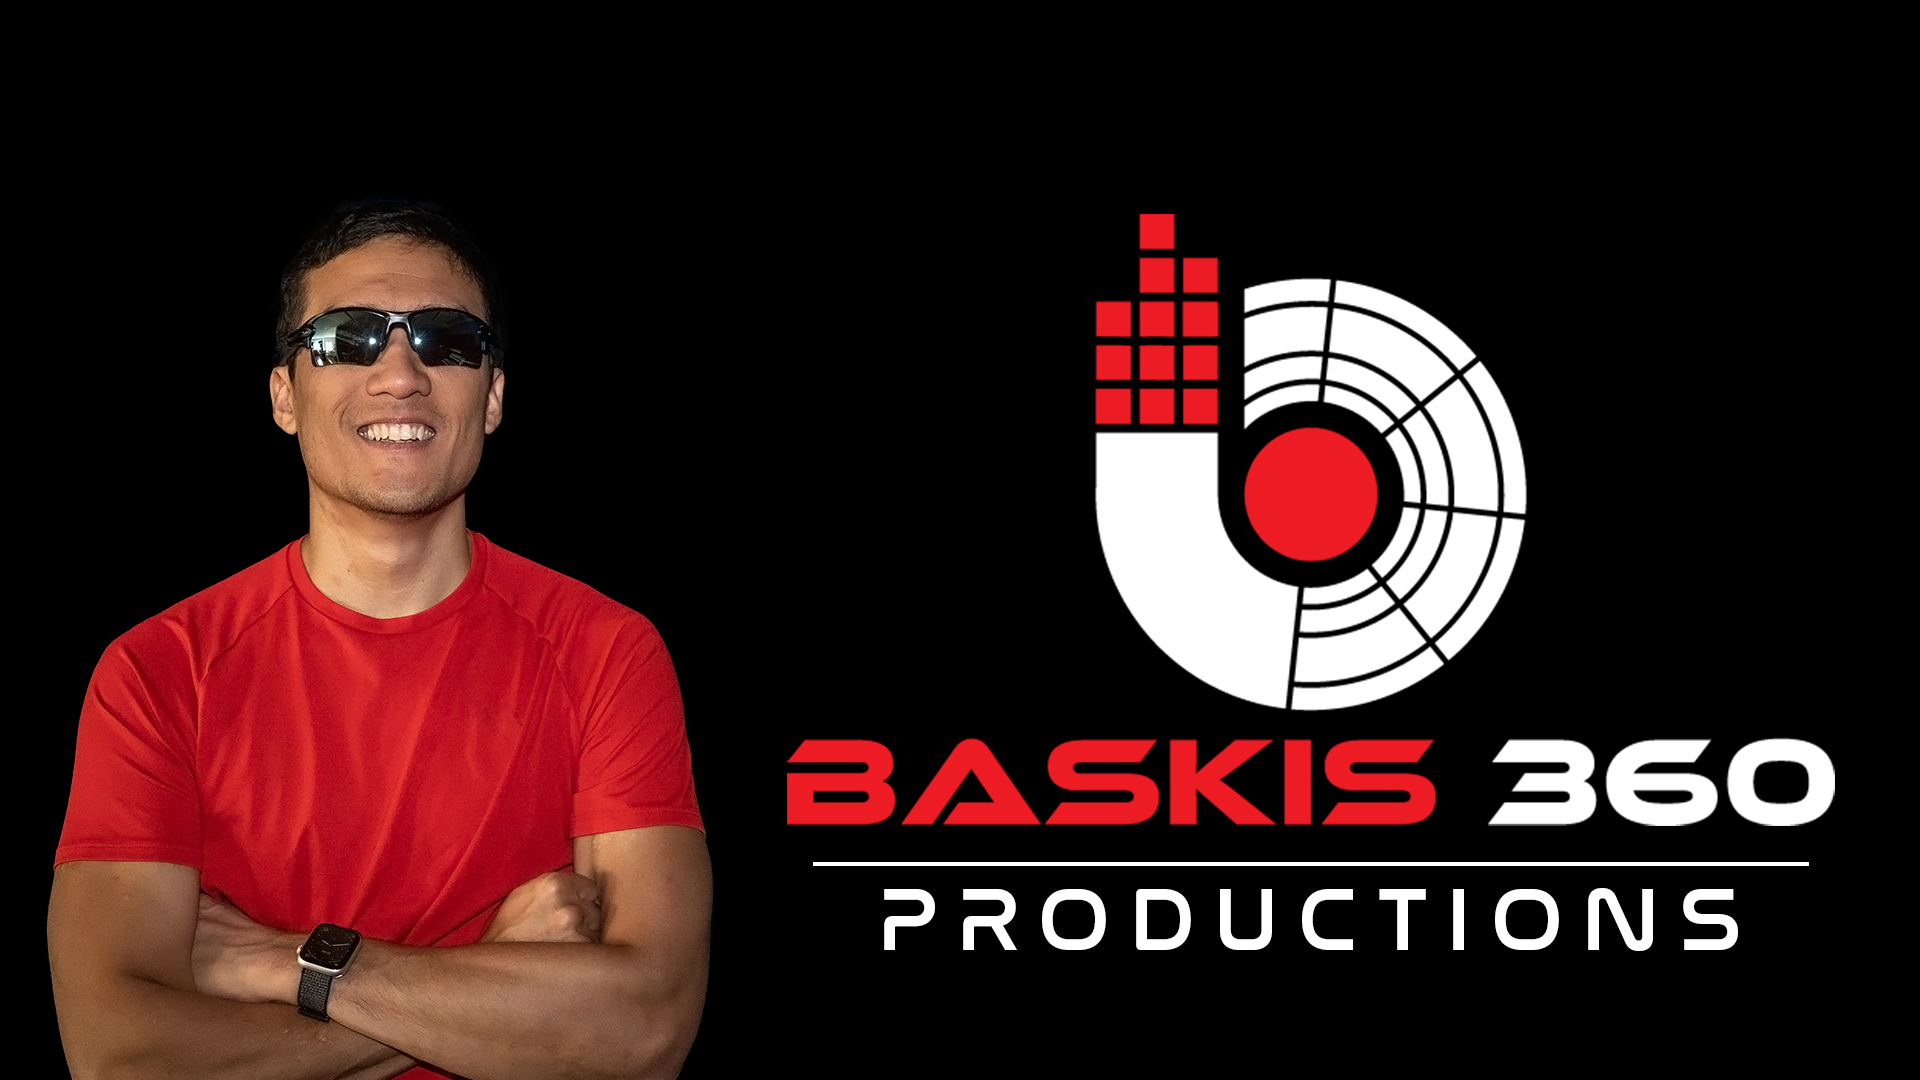 Steve Baskis stands next to his Baskis 360 Logo